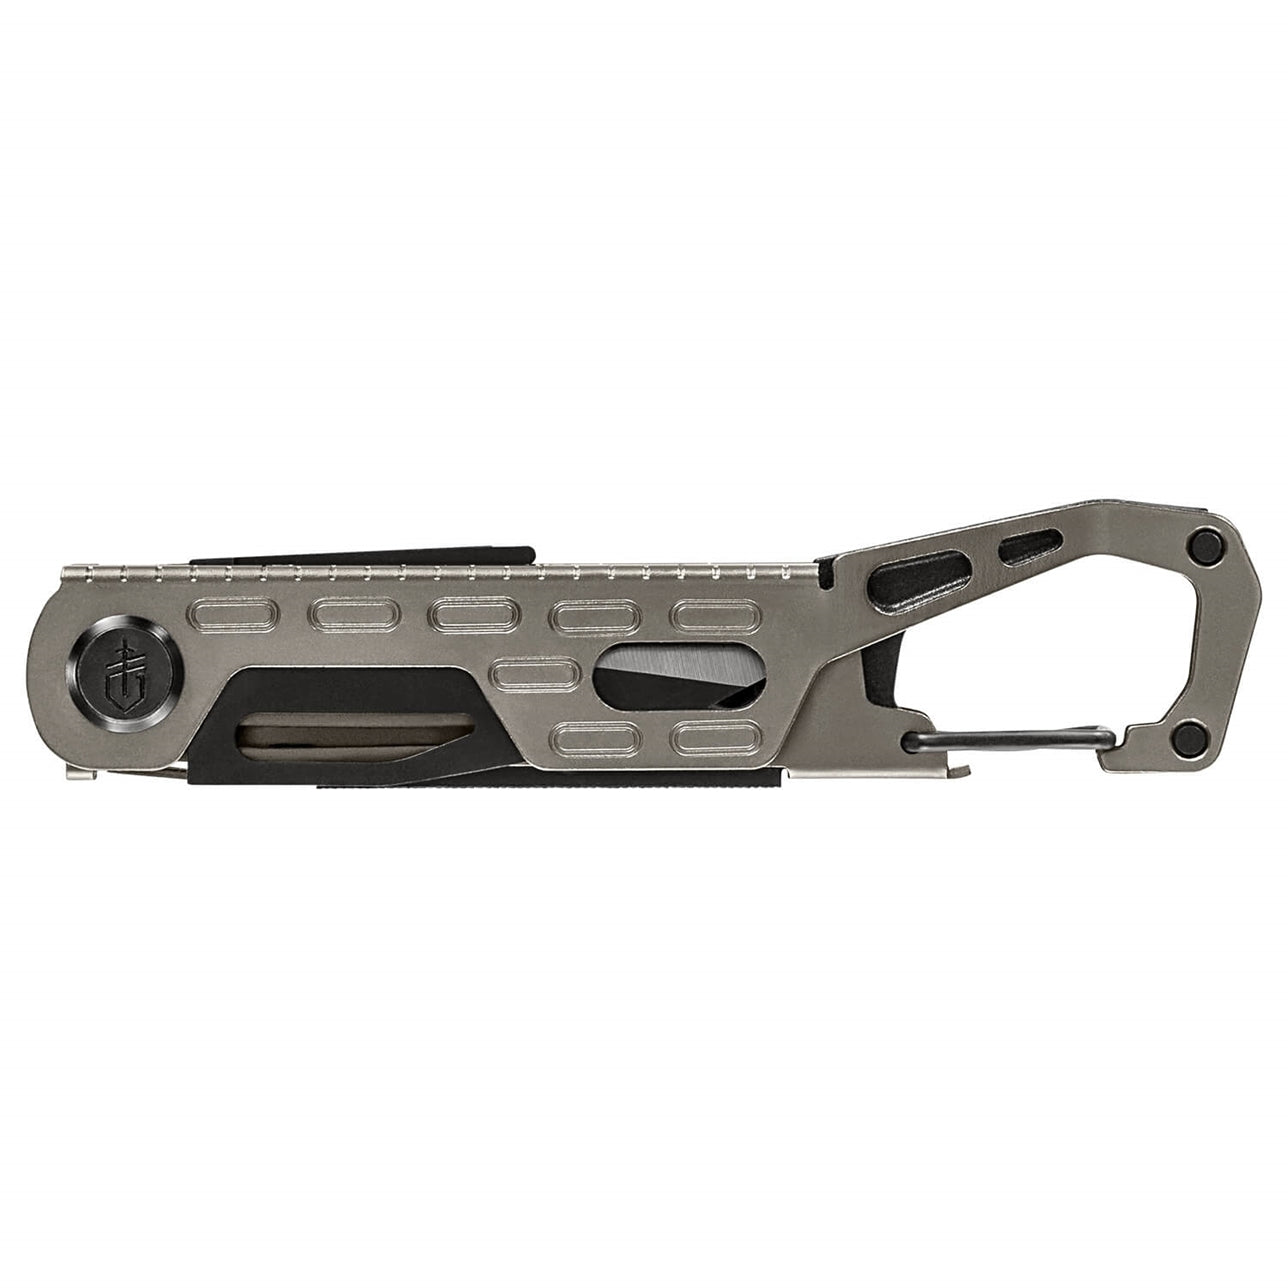 gerber stakeout compact multitool for sale near blanco bandera texas at hawkes outdoors 2102512882